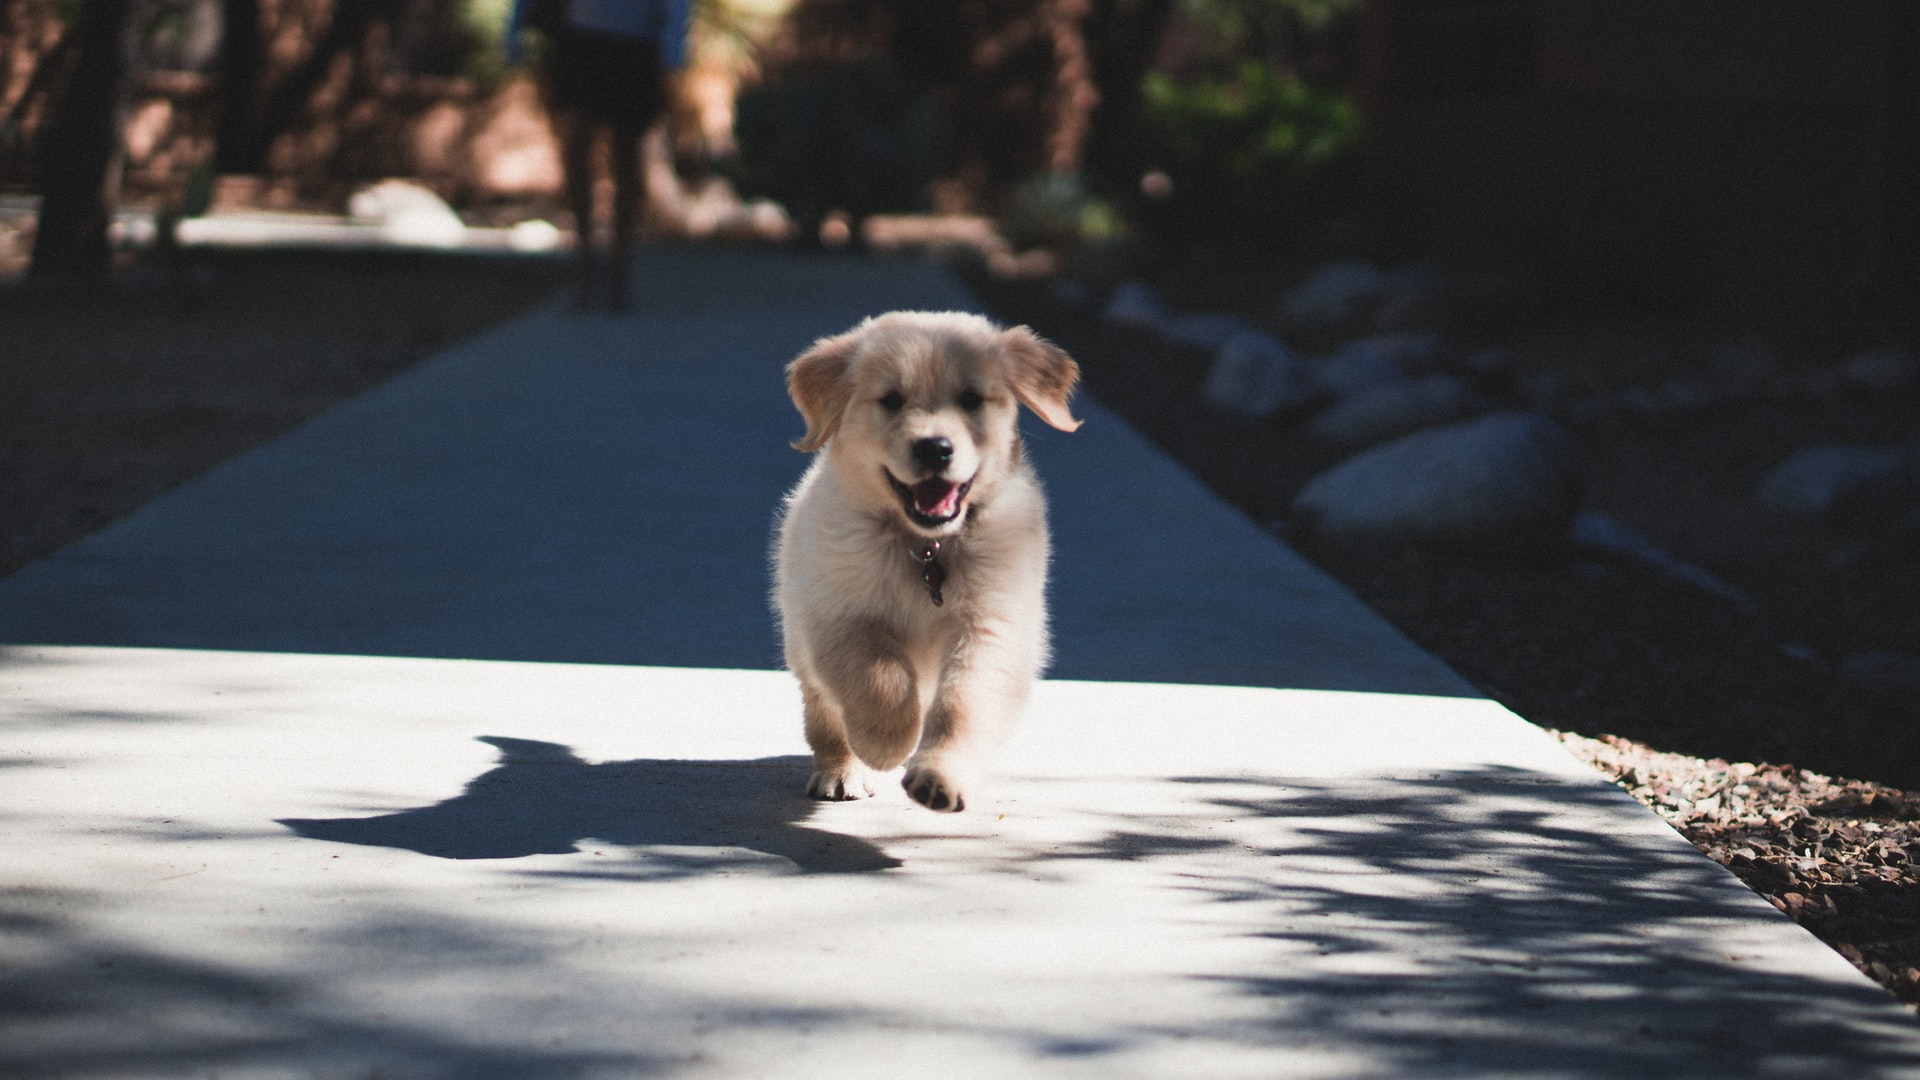 Working from home prompted 50% to adopt pets. Photo by Andrew Schultz via Unsplash